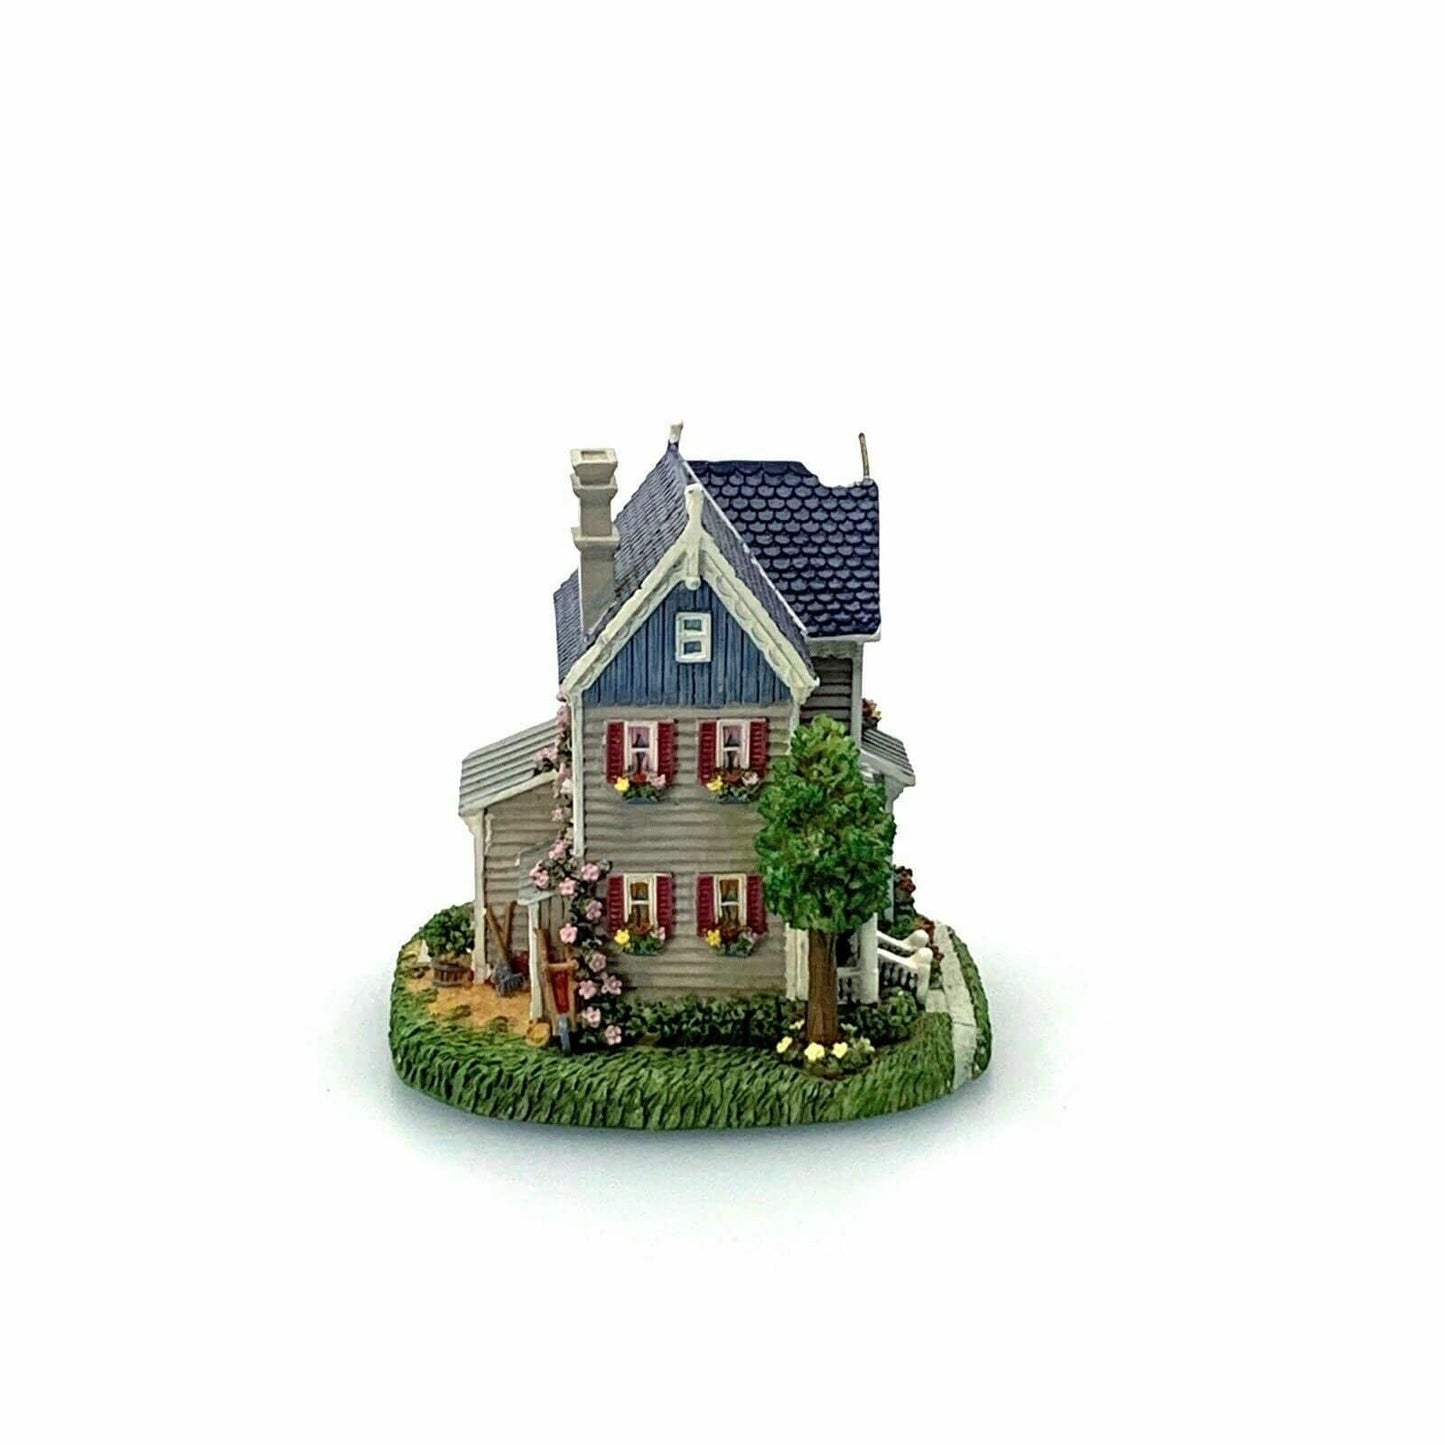 Liberty Falls Americana Collection AH228 “The Price Home” 2001 Holiday